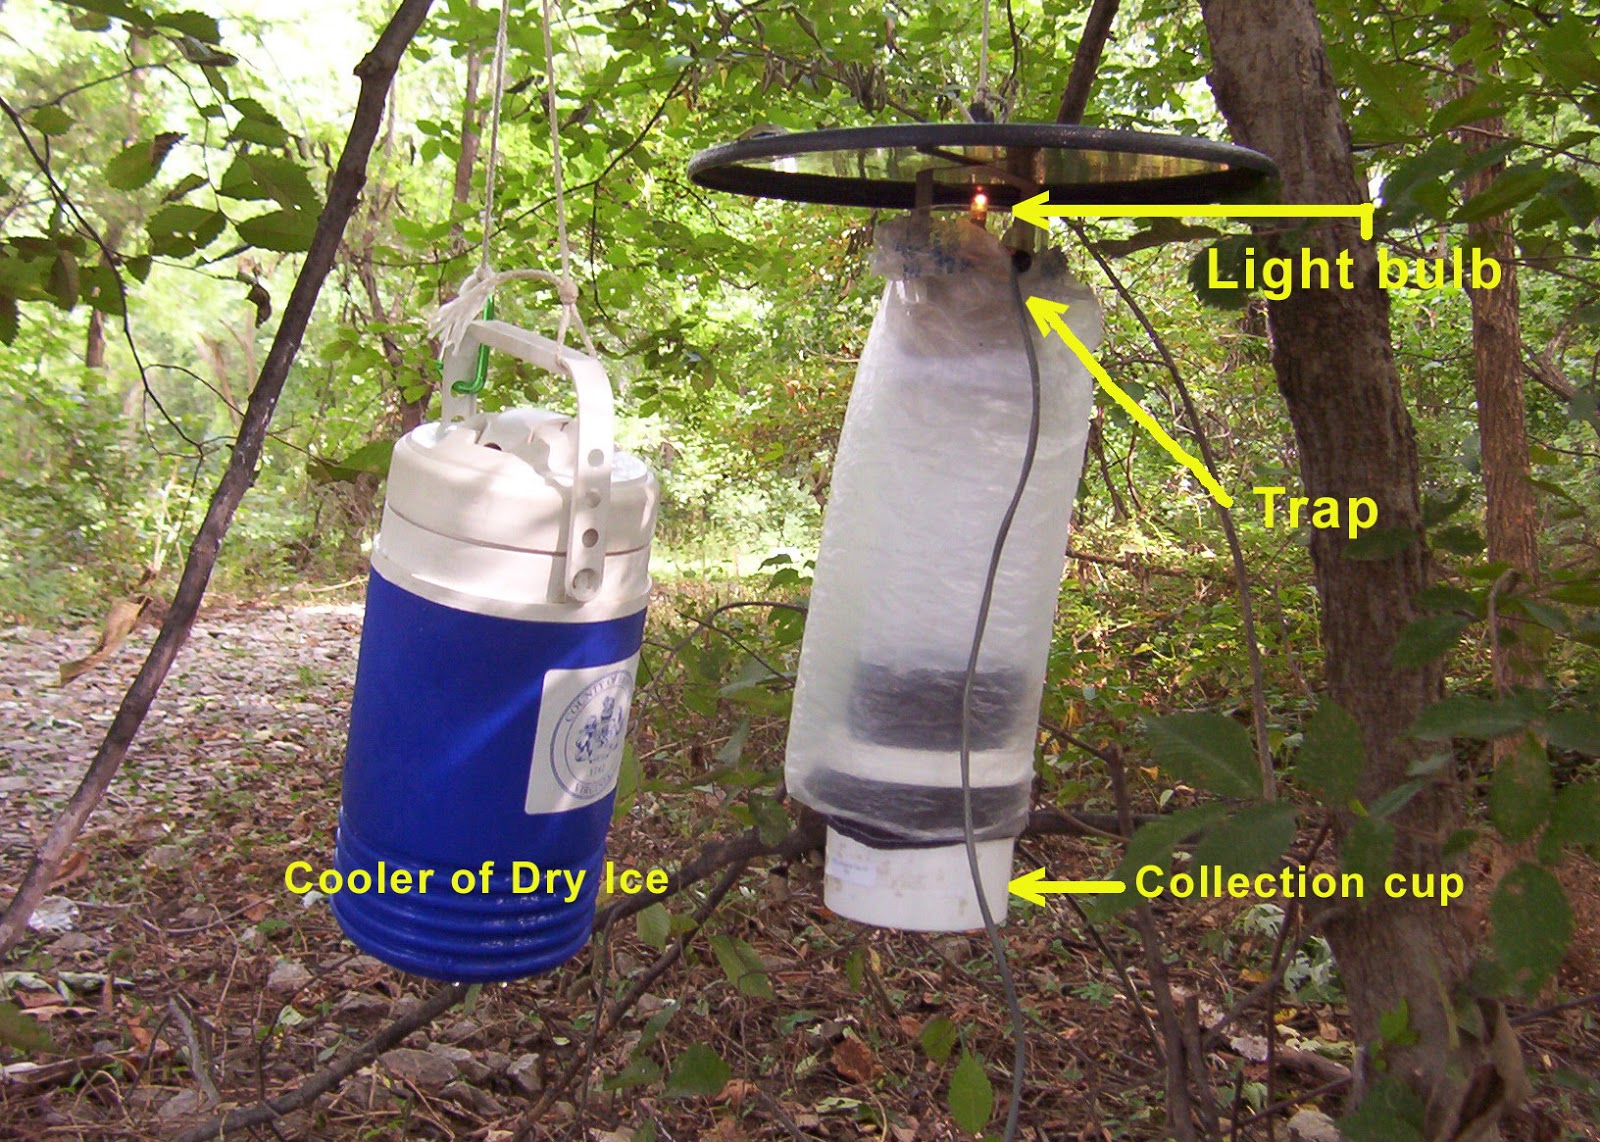 CO2 traps that are currently used attract female mosquitoes when they are searching for a blood meal. Dry ice is CO2 in solid form as it warms up it turns directly into a gas and leaks out of the cooler. This attracts the mosquitoes that are looking for the breath of an animal. Once they come in close they see the light and are attracted towards in (we call this positive phototaxis). A fan then sucks the mosquito into the collection cup where it is unable to escape. My trap would work in a similar method except I would be using the chemicals found in their favorite plants instead of CO2. 